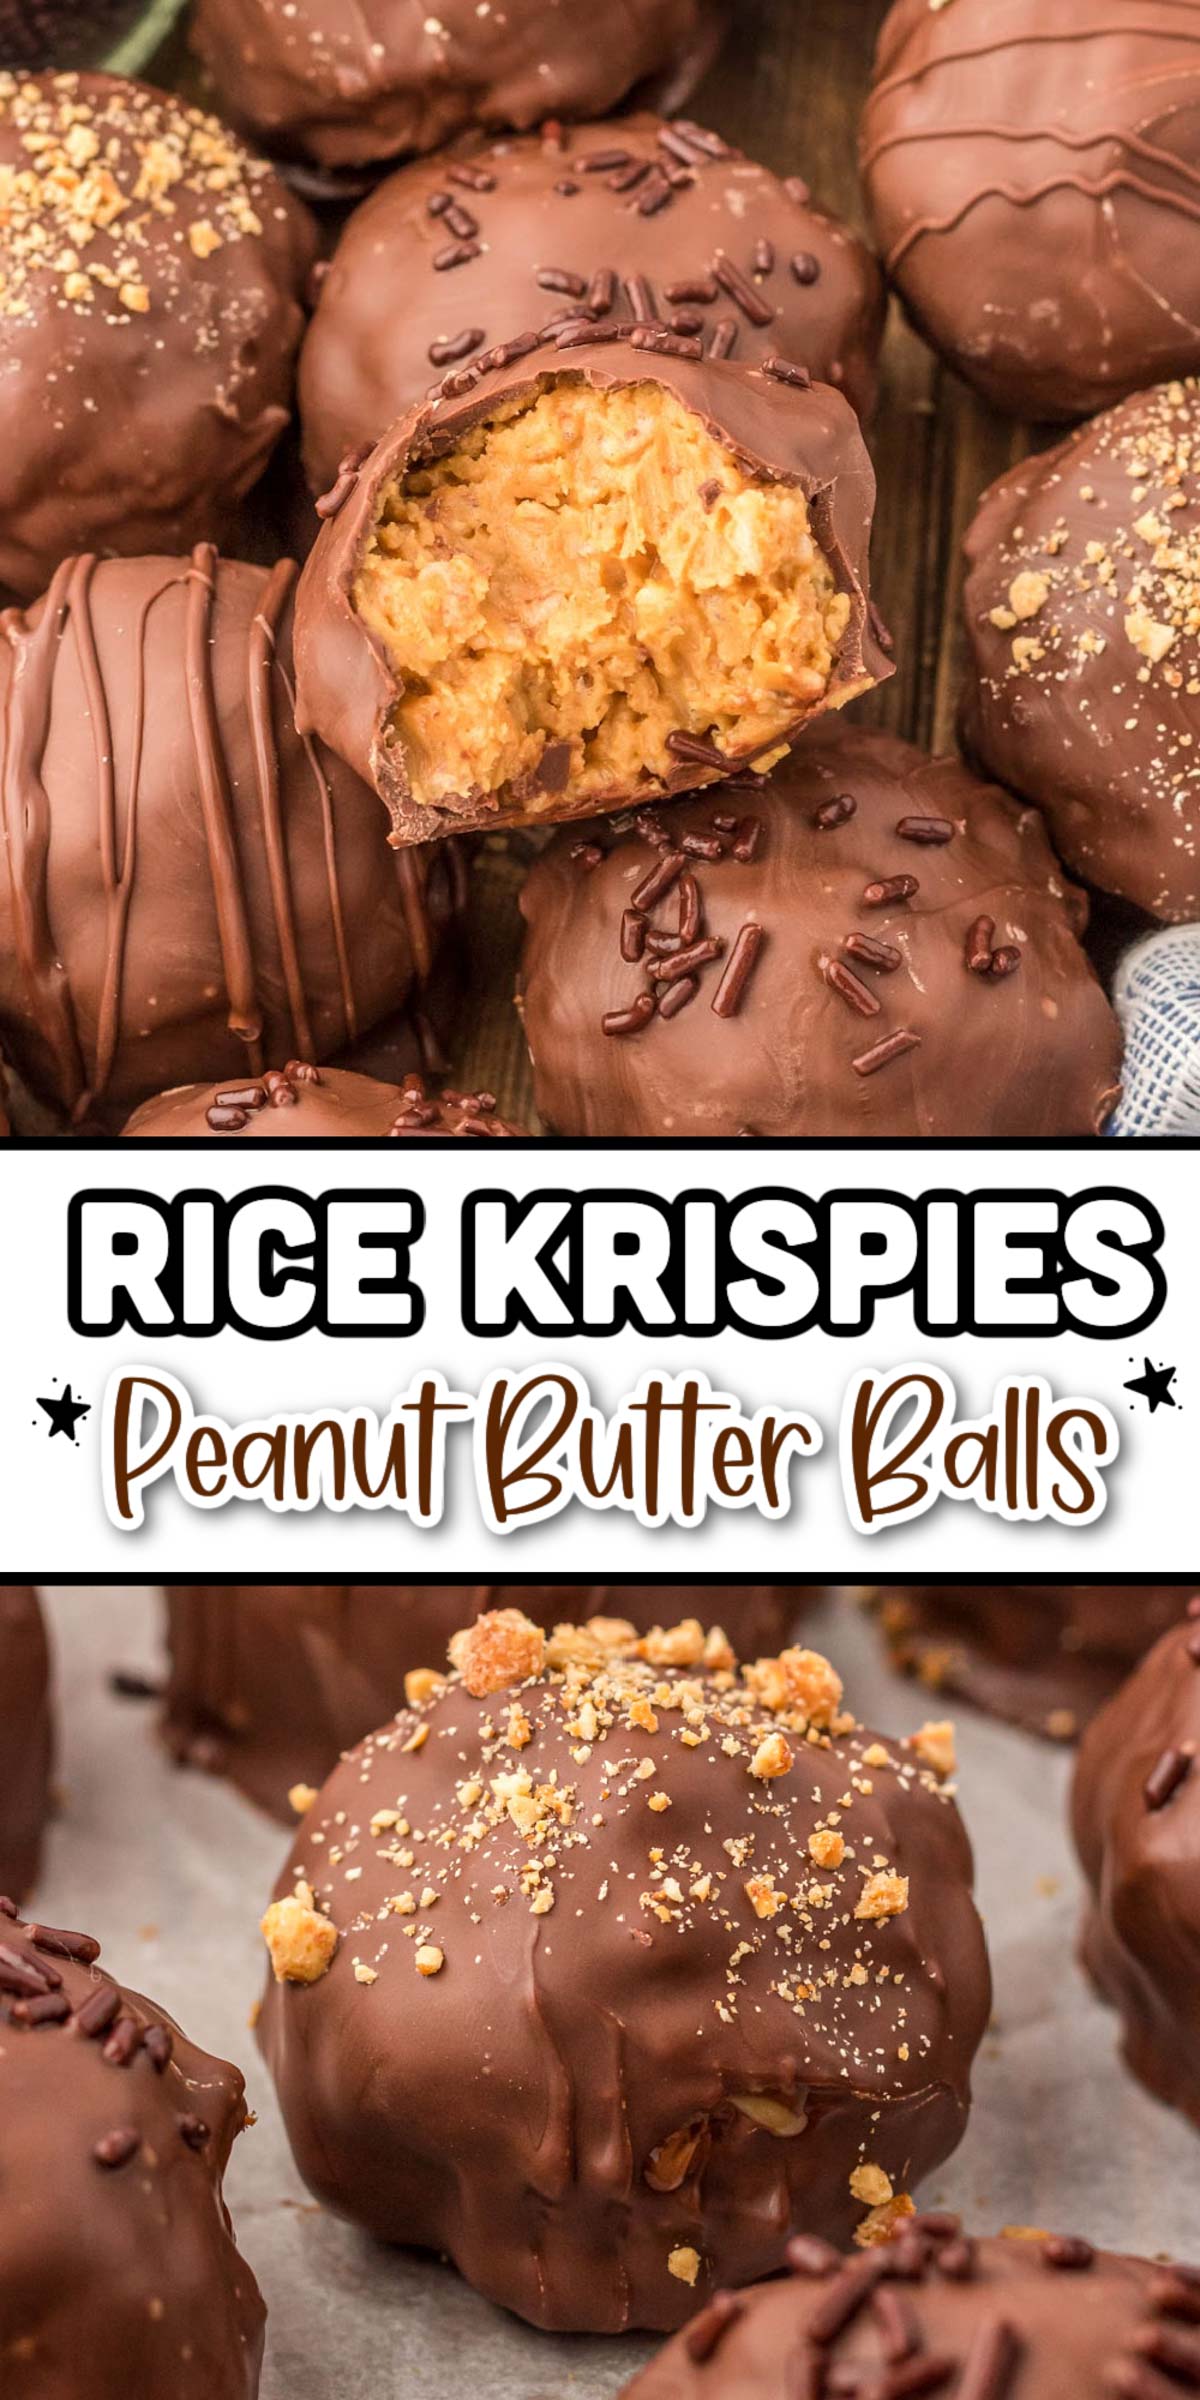 These Rice Krispie Peanut Butter Balls are a sweet and salty no-bake treat that's made with only 6 ingredients in just 45 minutes! Great for potlucks and cookie trays! via @sugarandsoulco